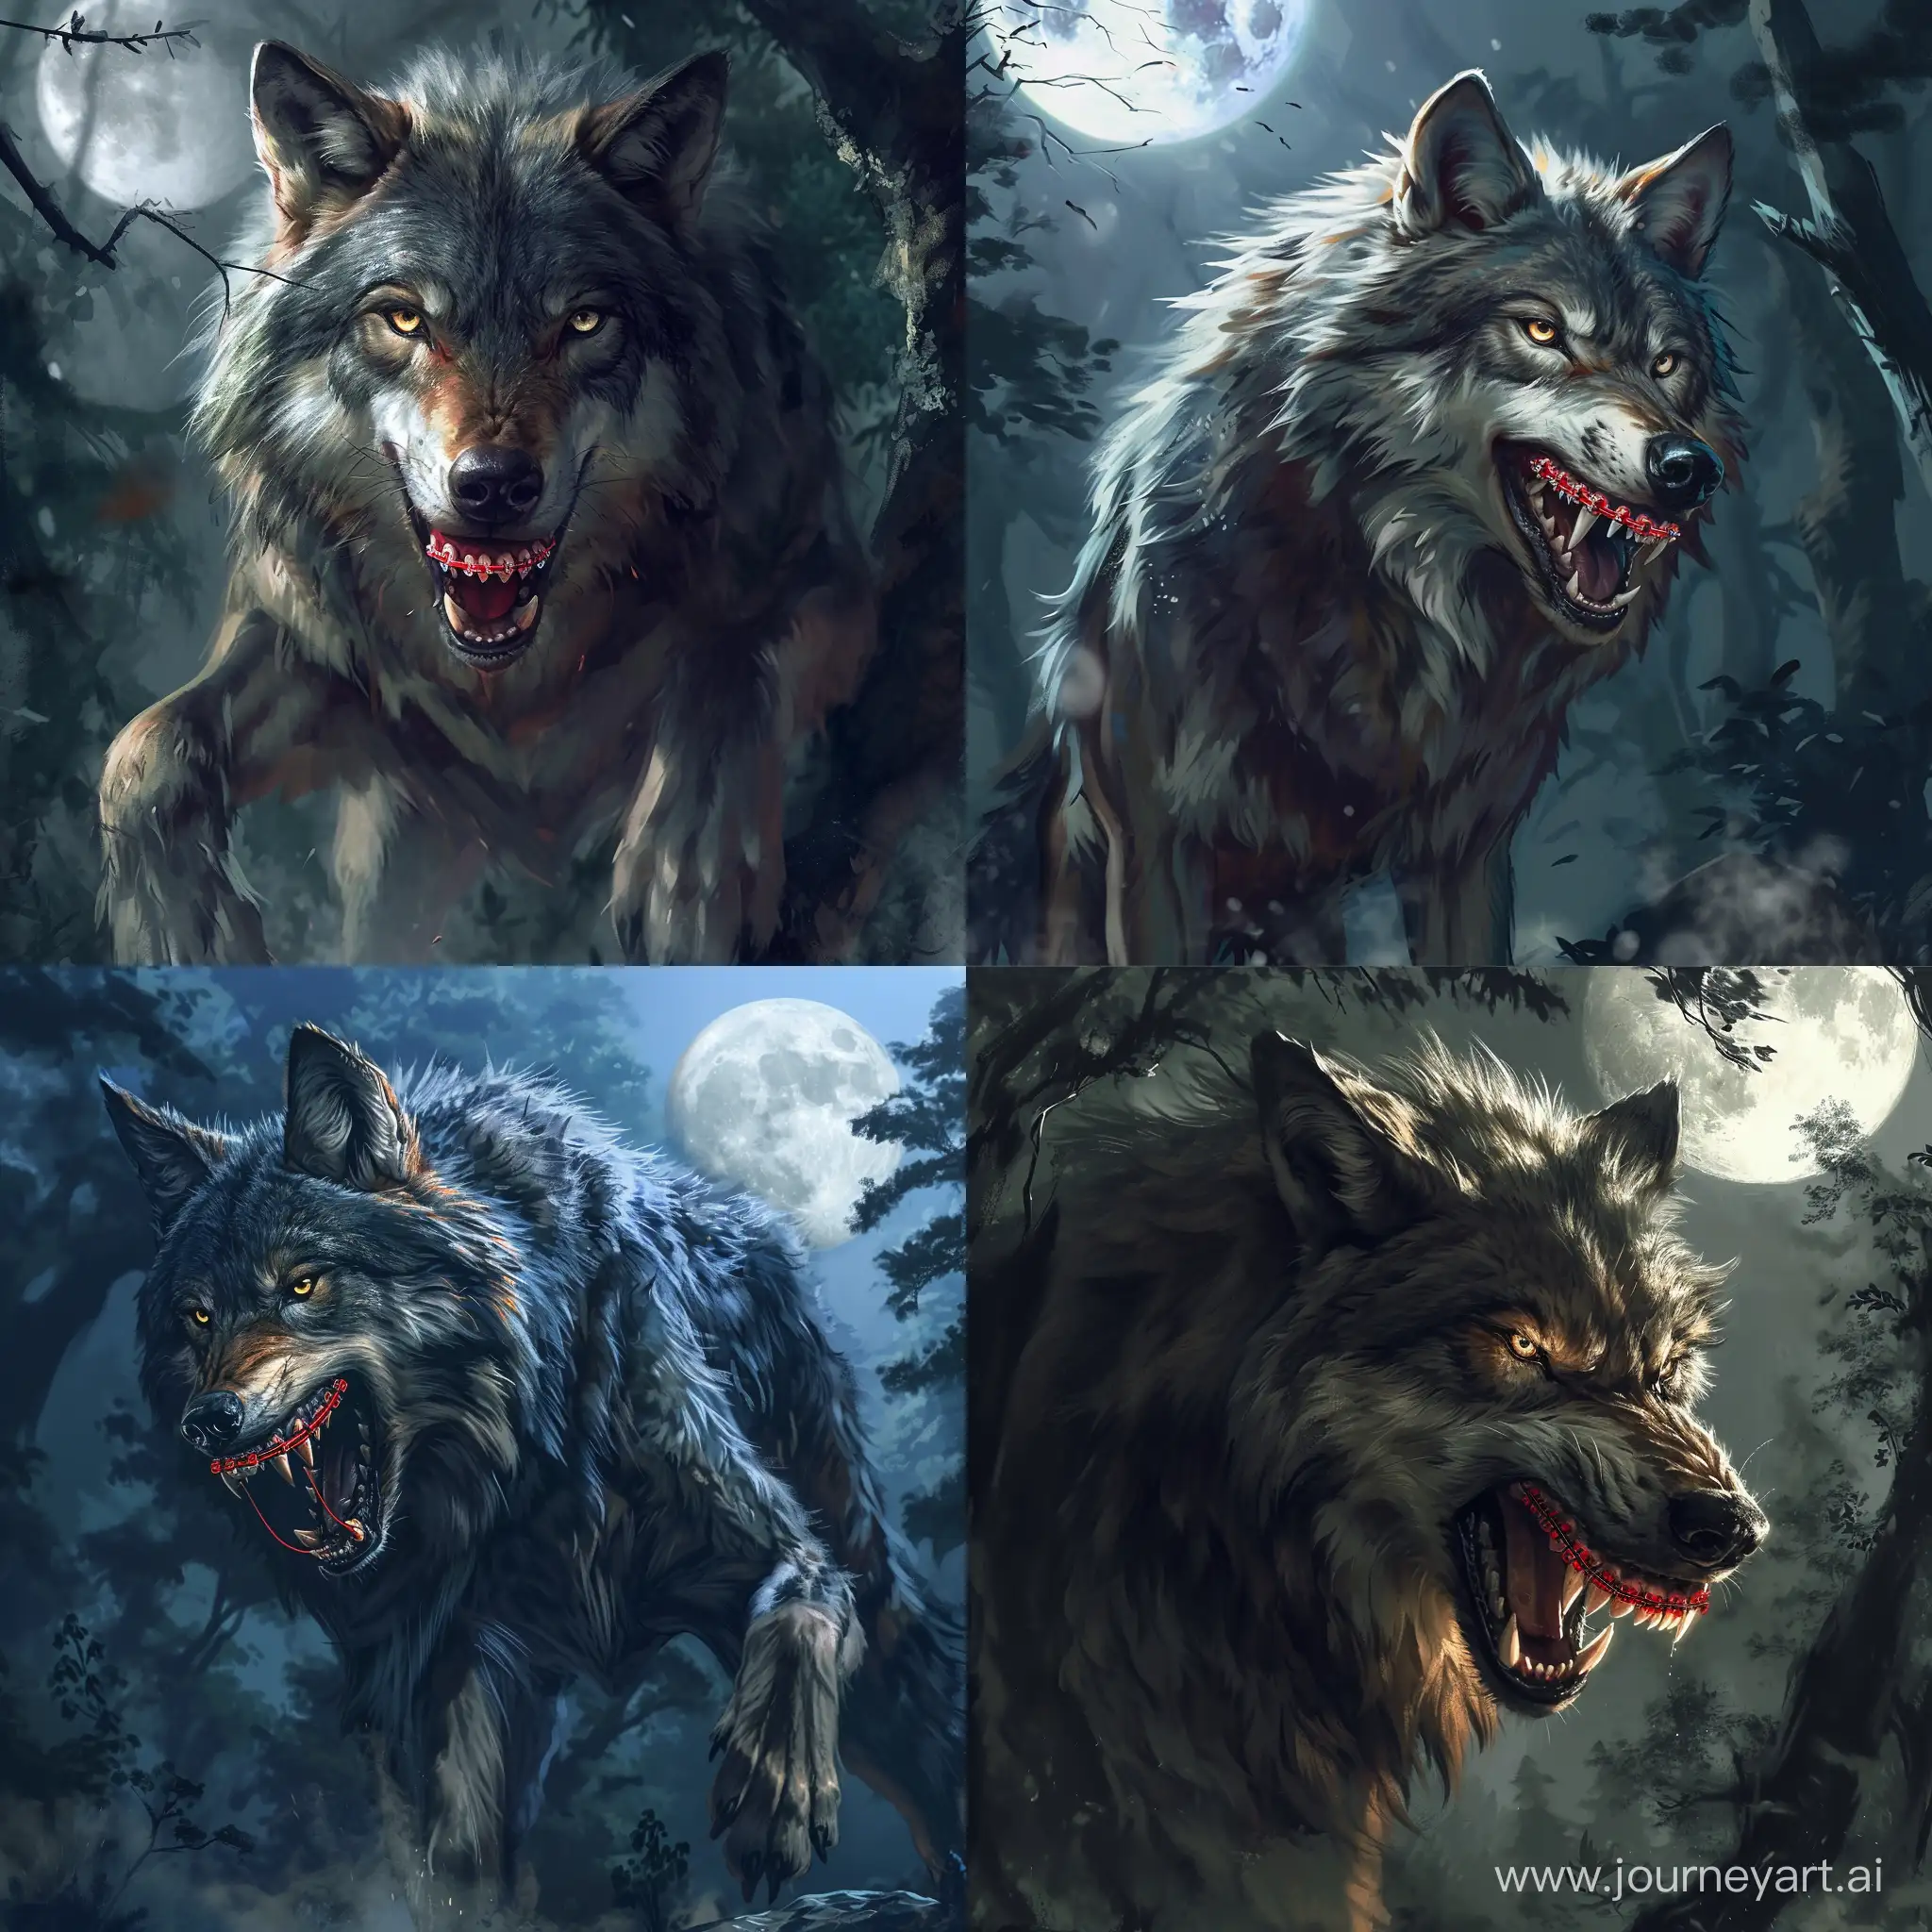 Majestic-Moonlit-Wolf-with-Fiery-Red-Orthodontic-Teeth